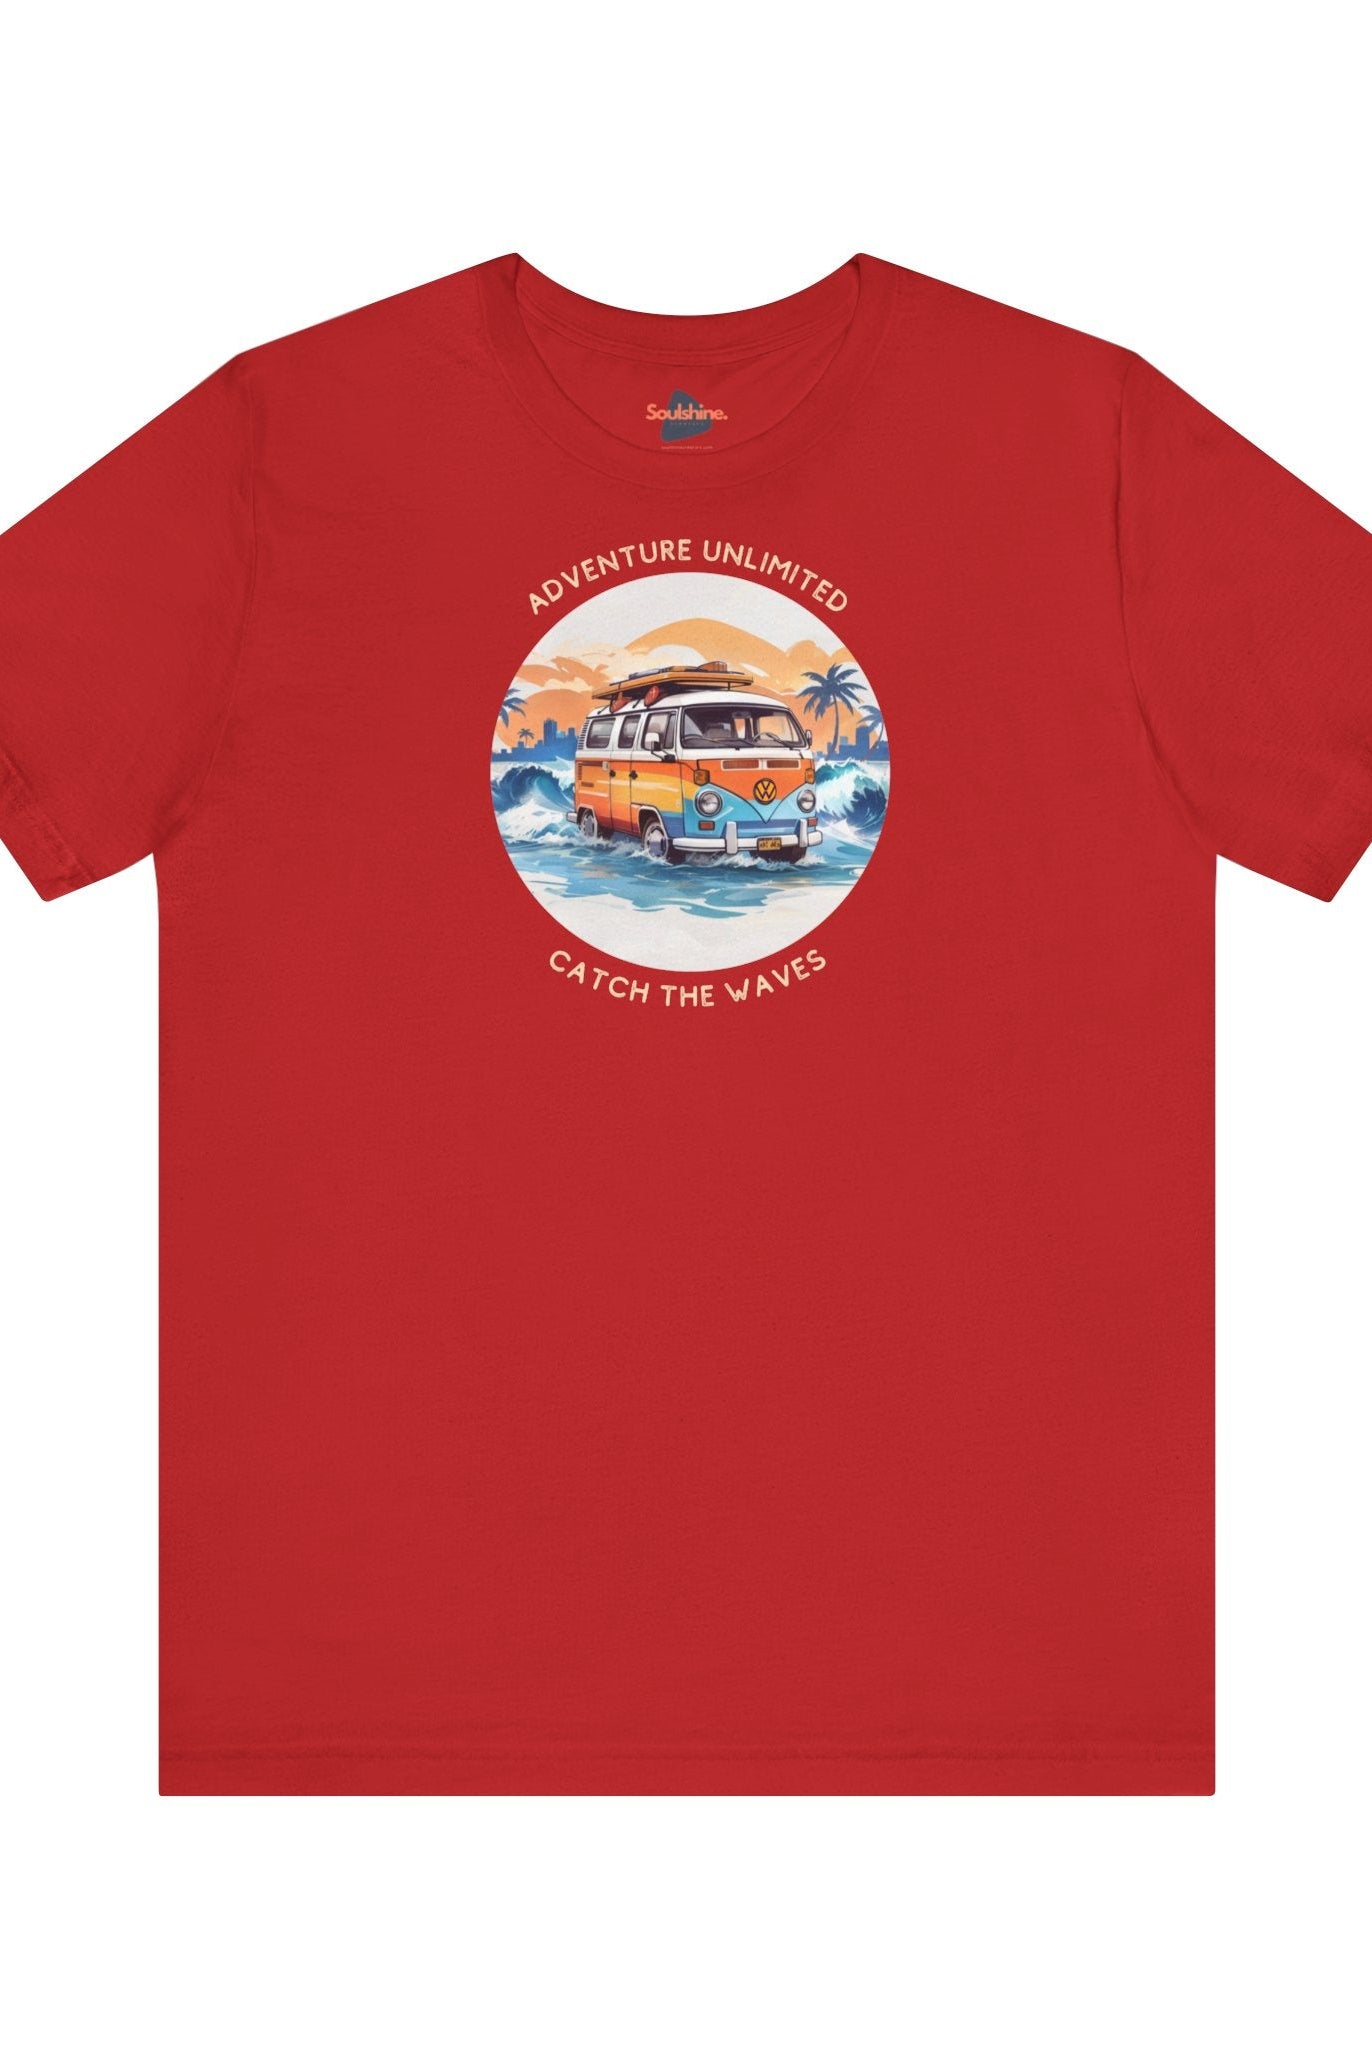 Red camper graphic T-shirt by Adventure Unlimited - Surfing Tee - Soulshinecreators - Bella Canvas EU, direct-to-garment printed item